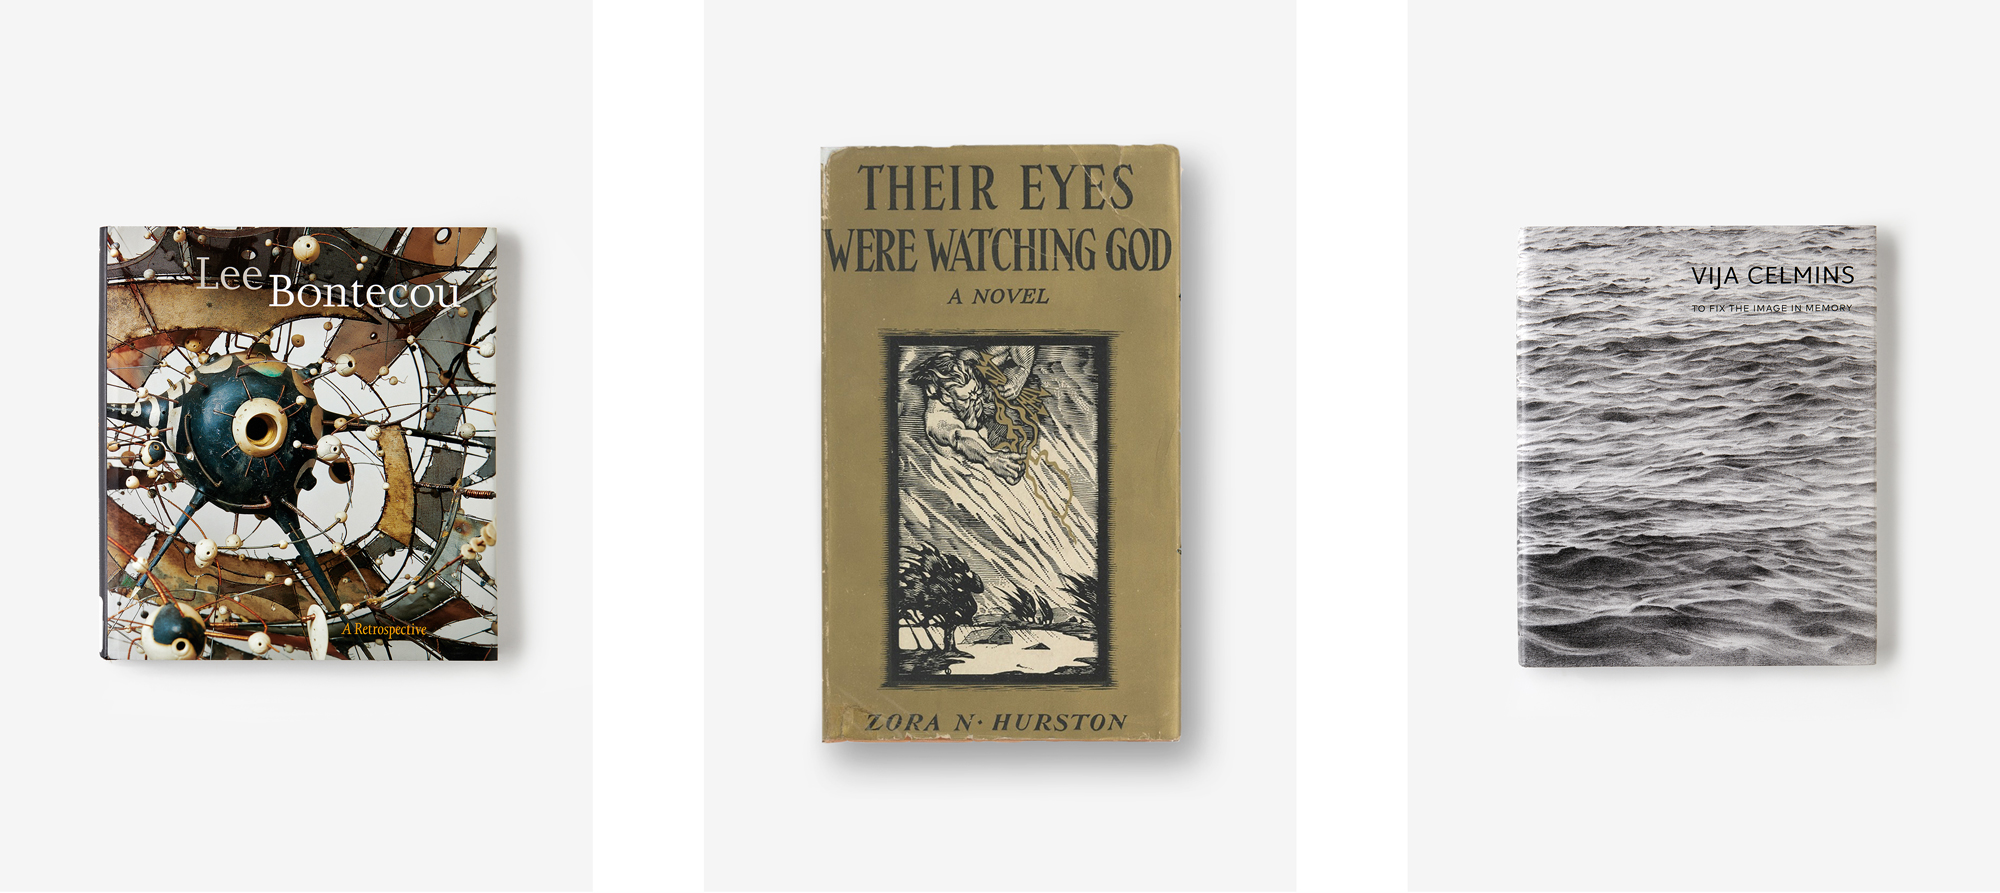 Three books: A Retrospective by Lee Bontecou, Their Eyes Were Watching God by Zora Neale Hurston, and To Fix the Image in Memory by Vija Celmins.